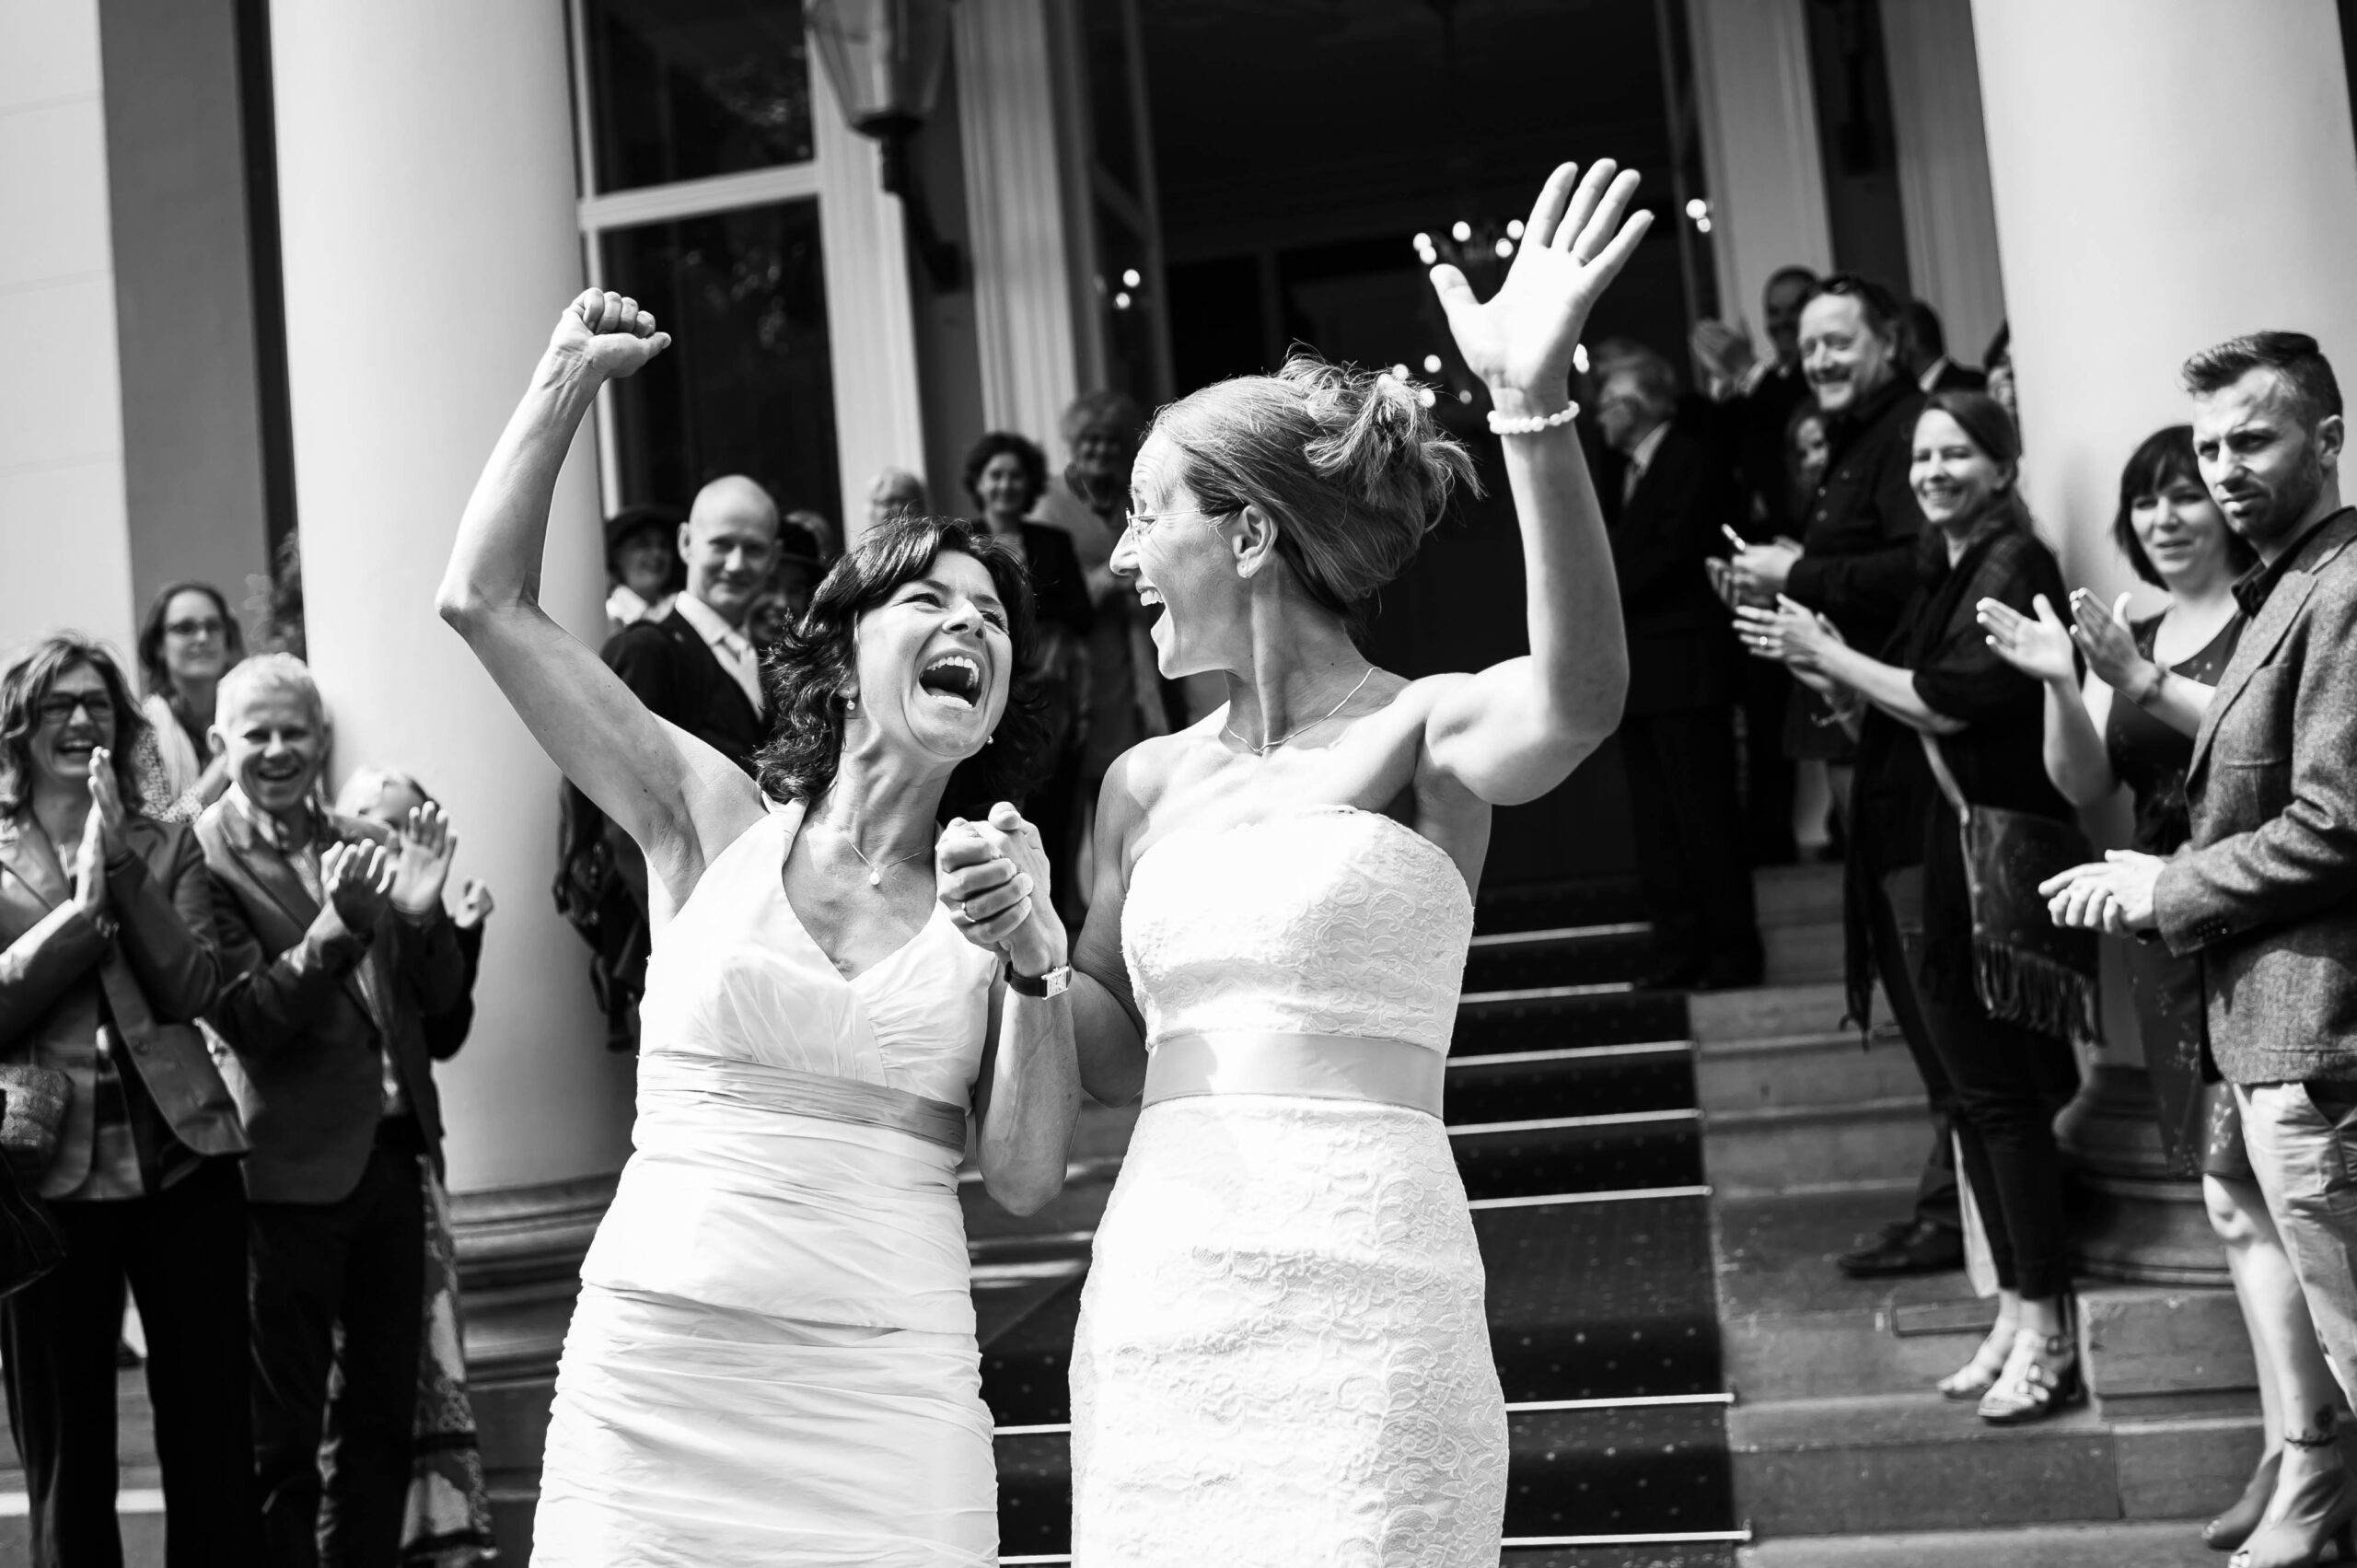 Newlyweds celebrating as they come out of the wedding venue, by Tori Deslauriers Photography